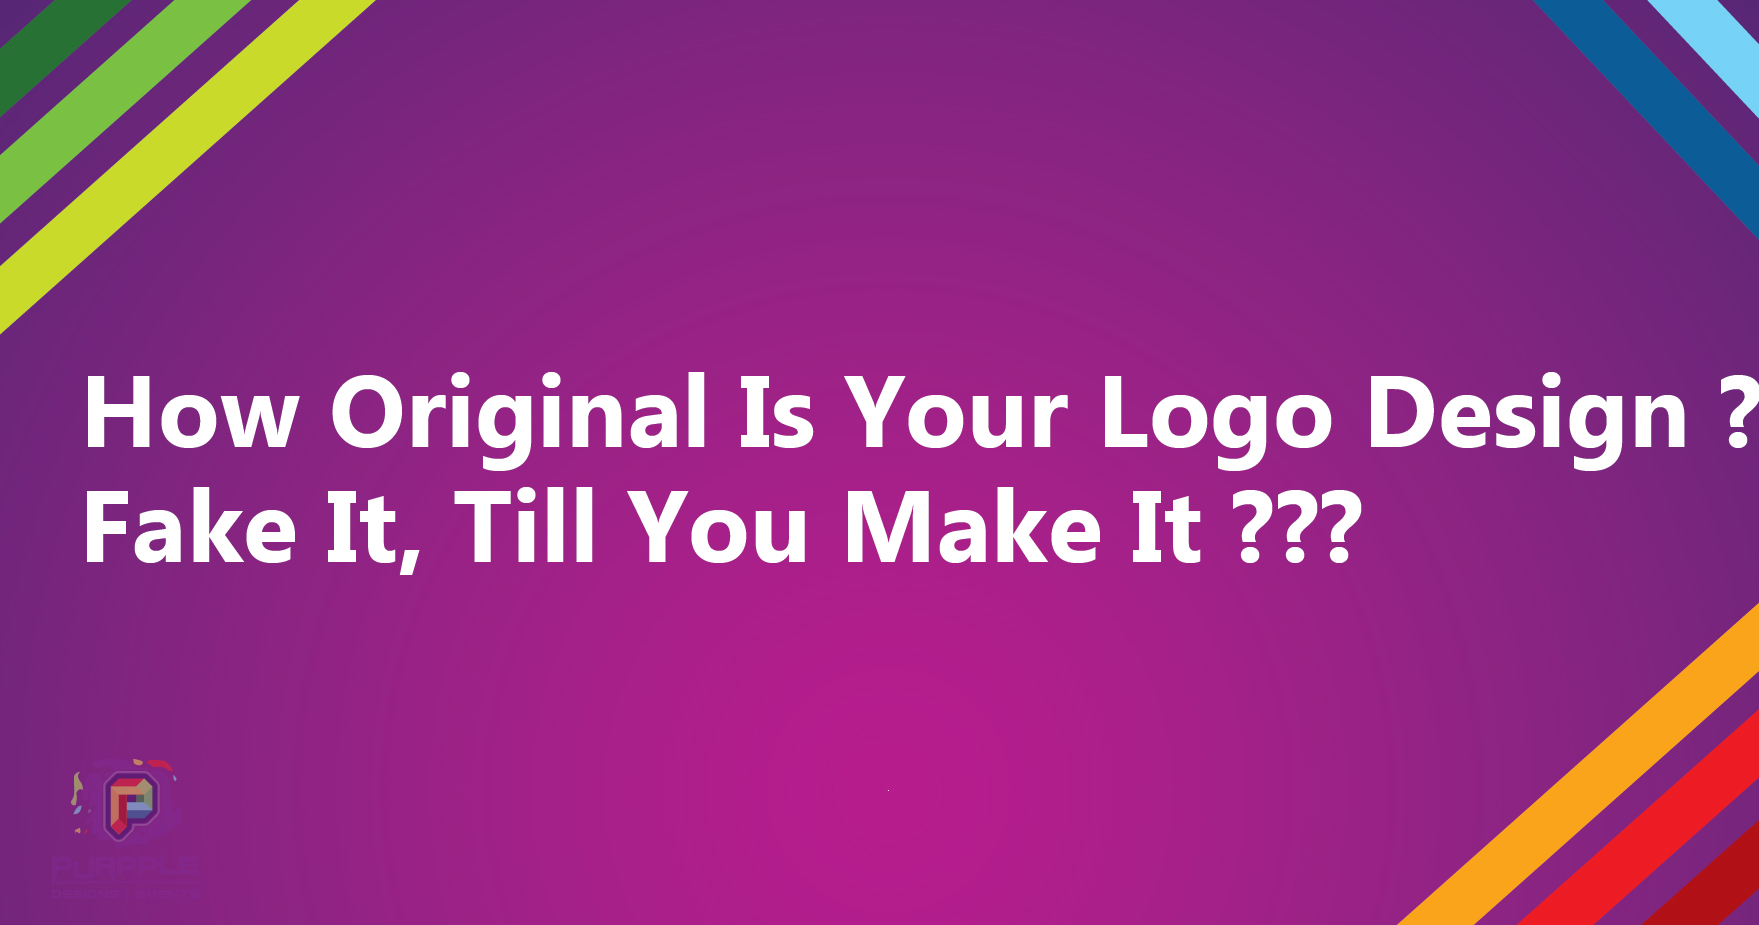 How Common Is Plagiarized Logo Design These Days